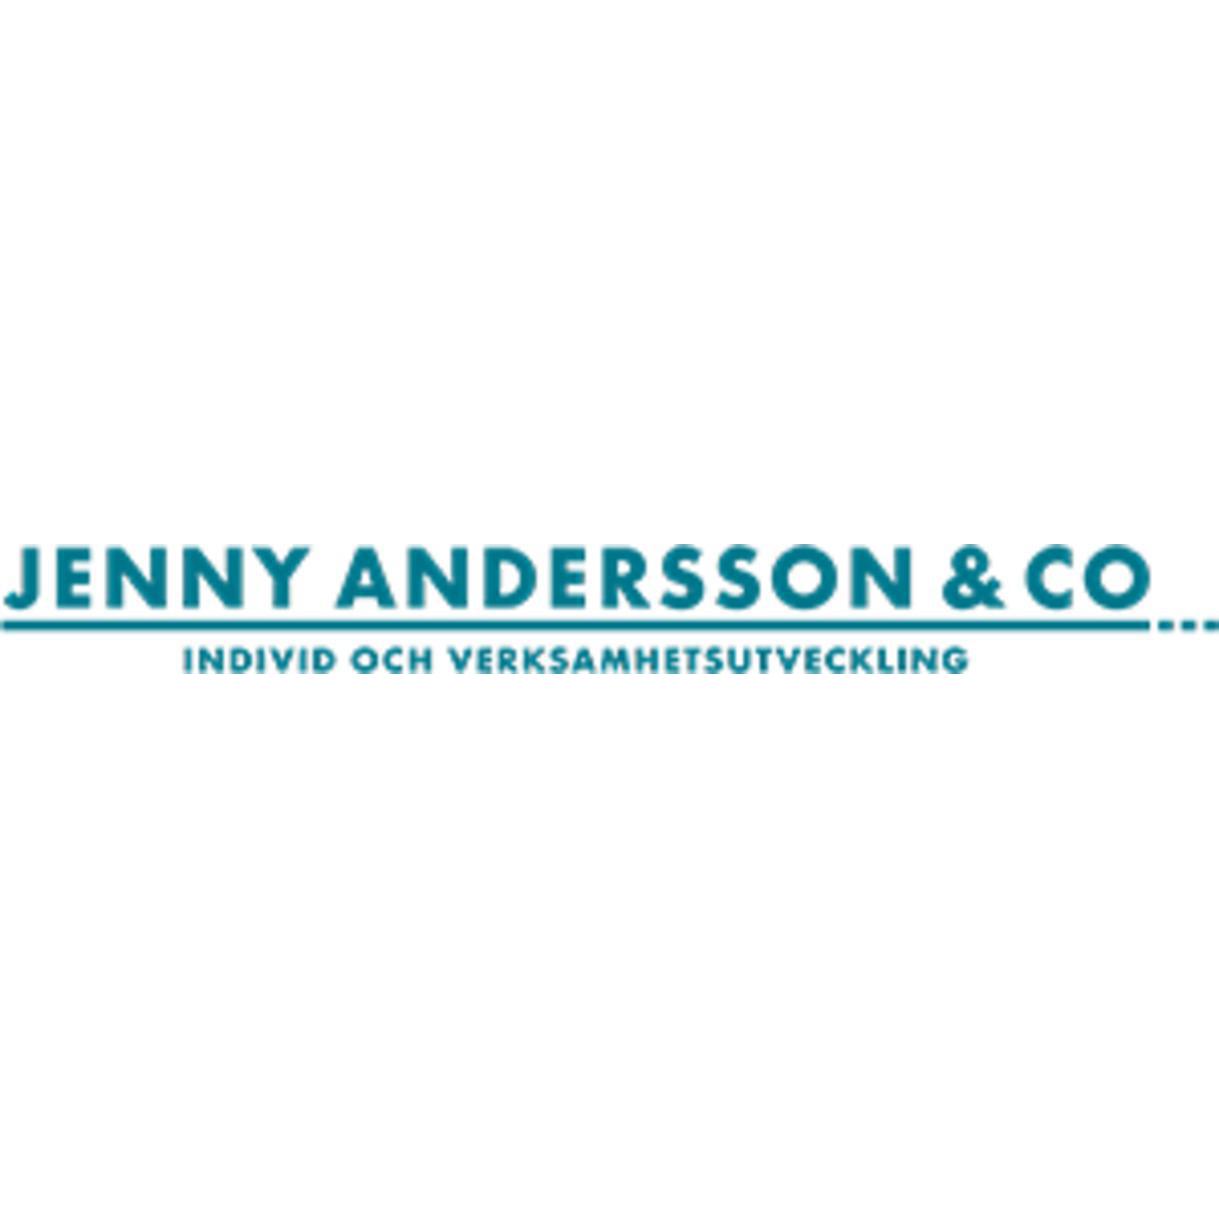 Jenny Andersson & Co AB Logo